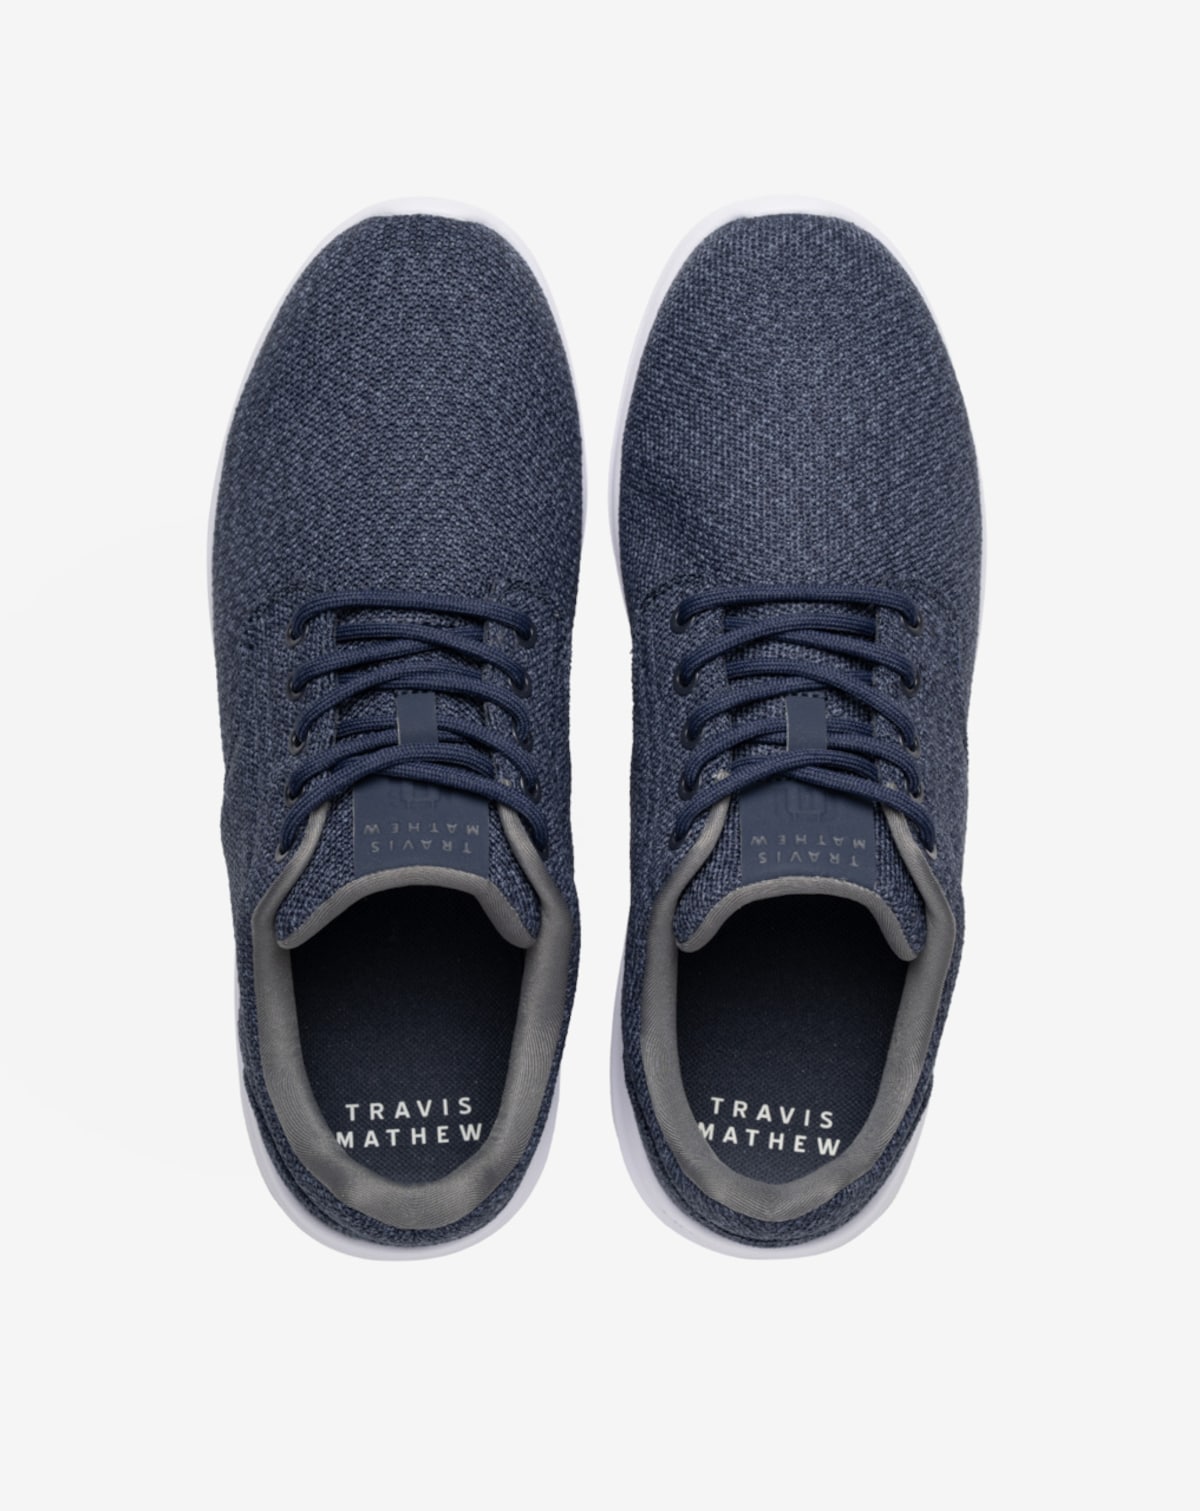 Travis Mathew The Daily Knit 2 Knit Lace Up Sneaker in Mood Indigo